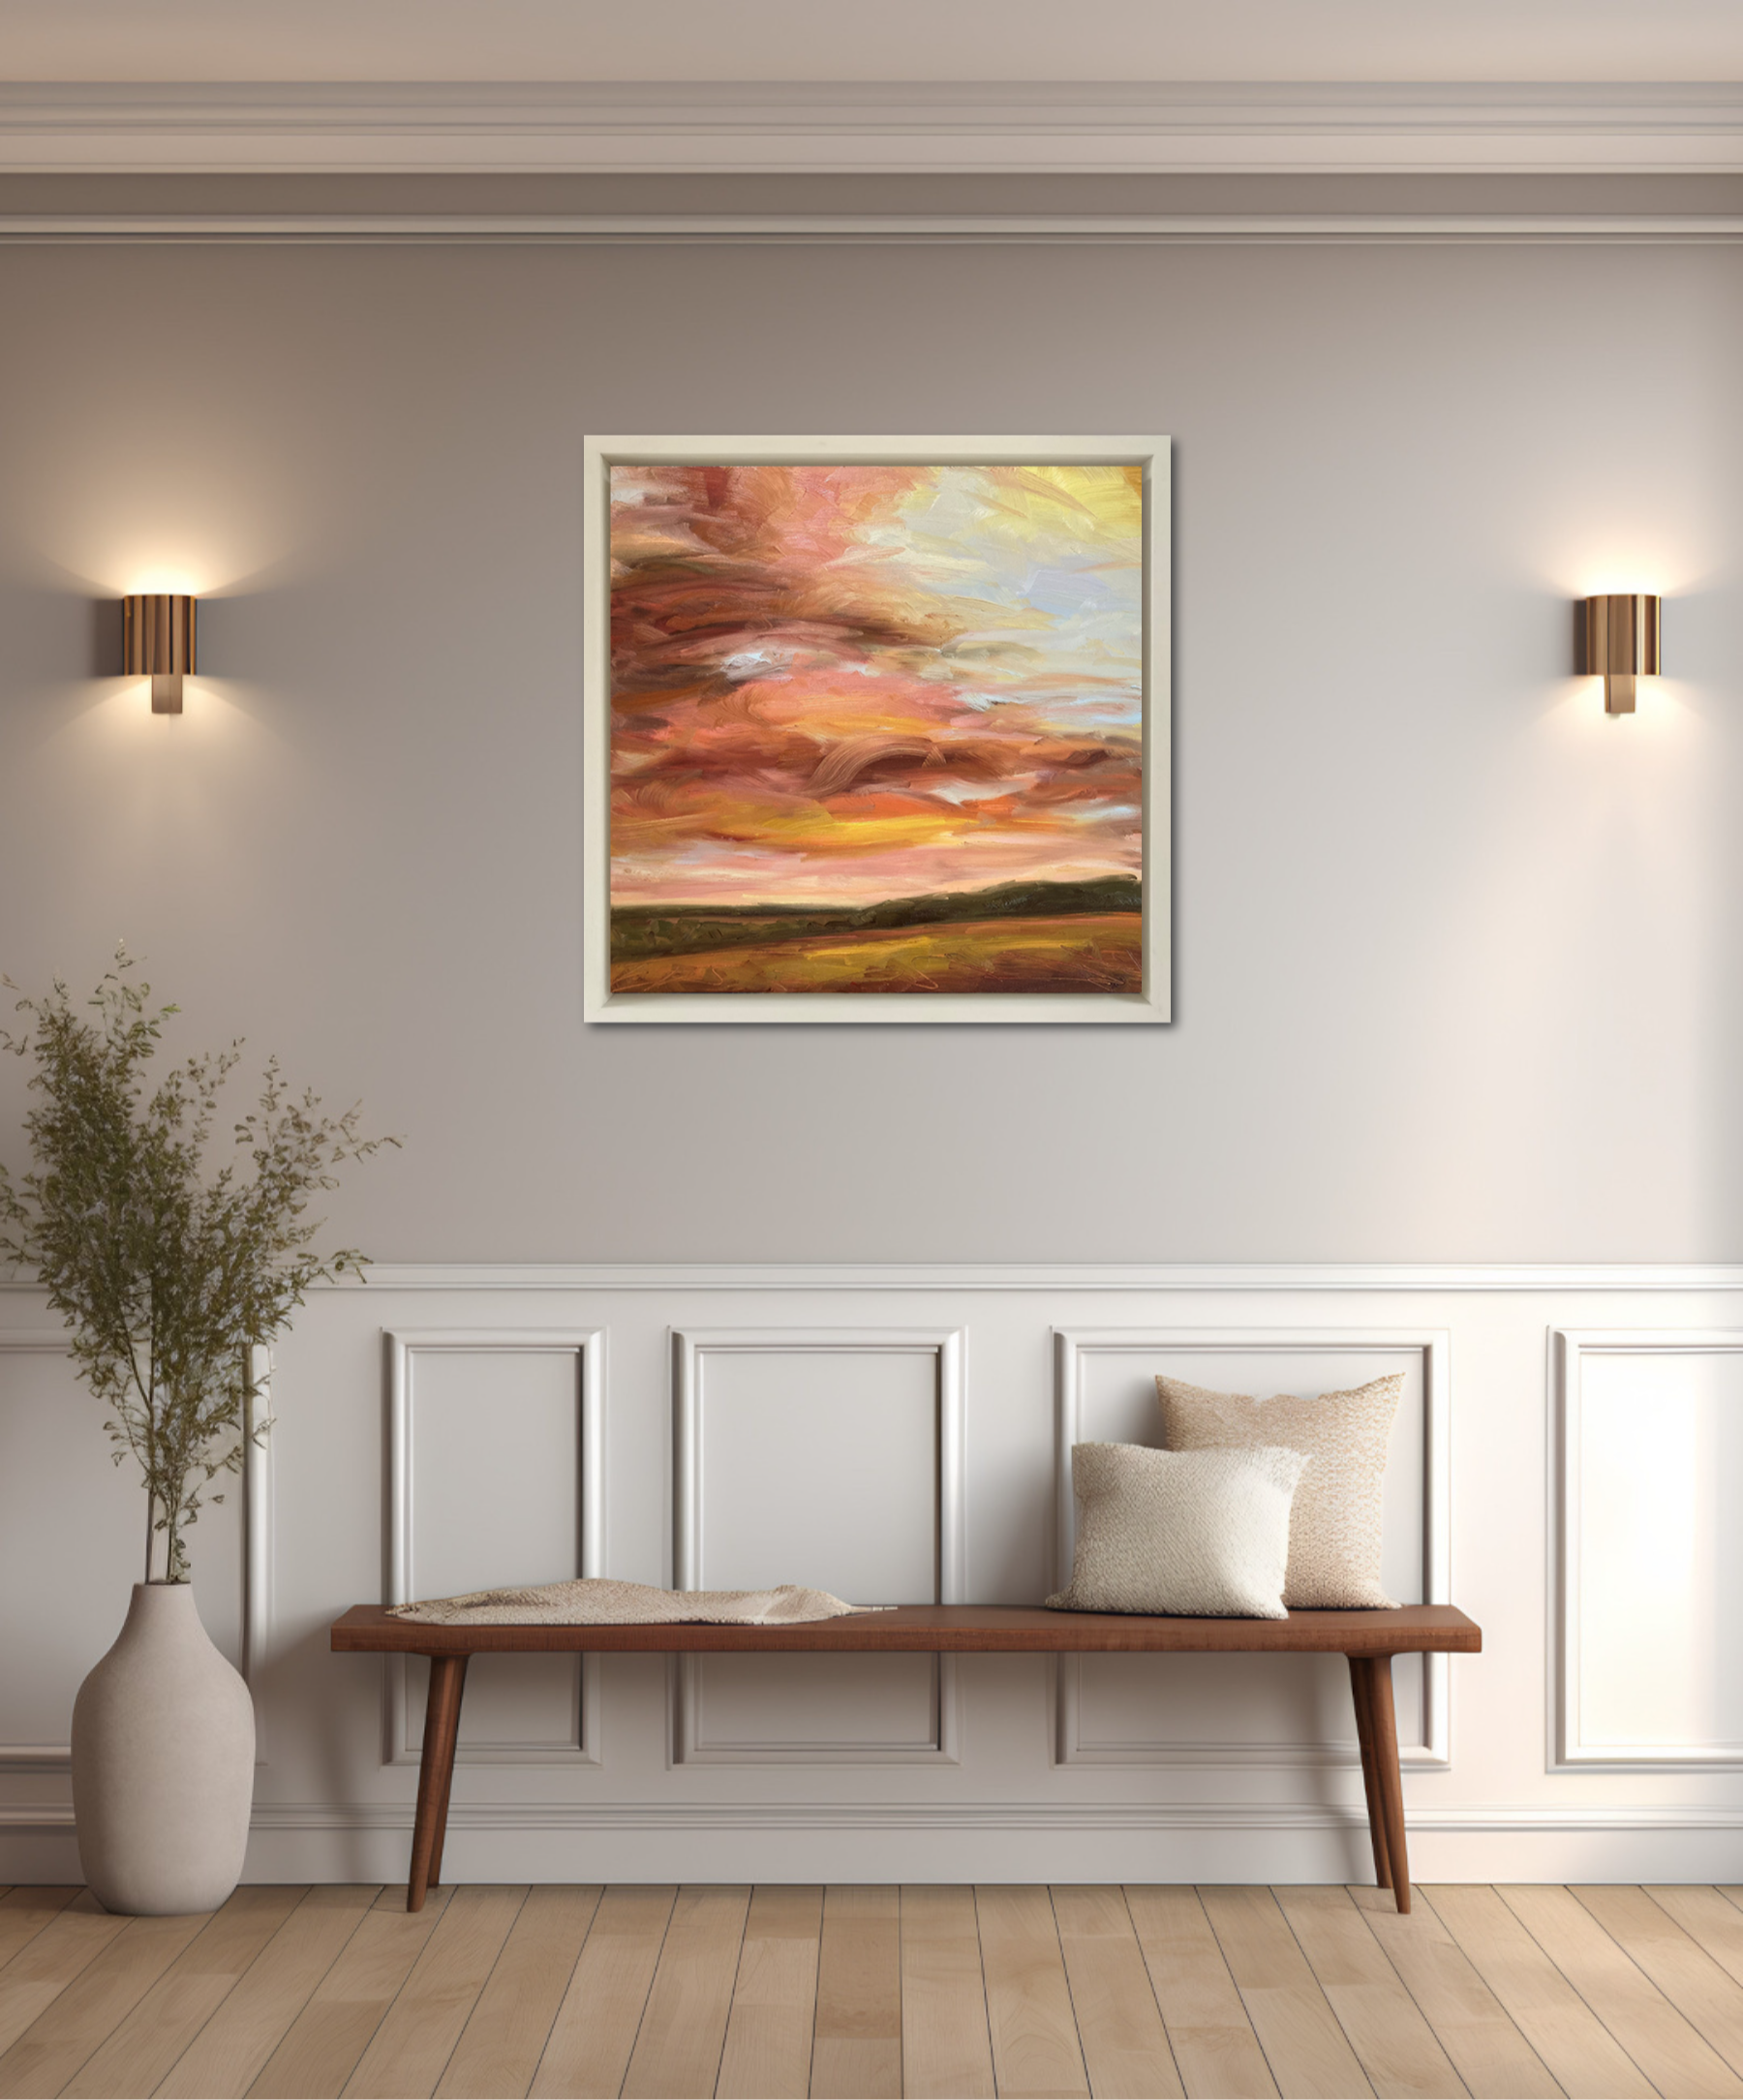 Glowing Original Oil Landscape Painting In Room Setting 2